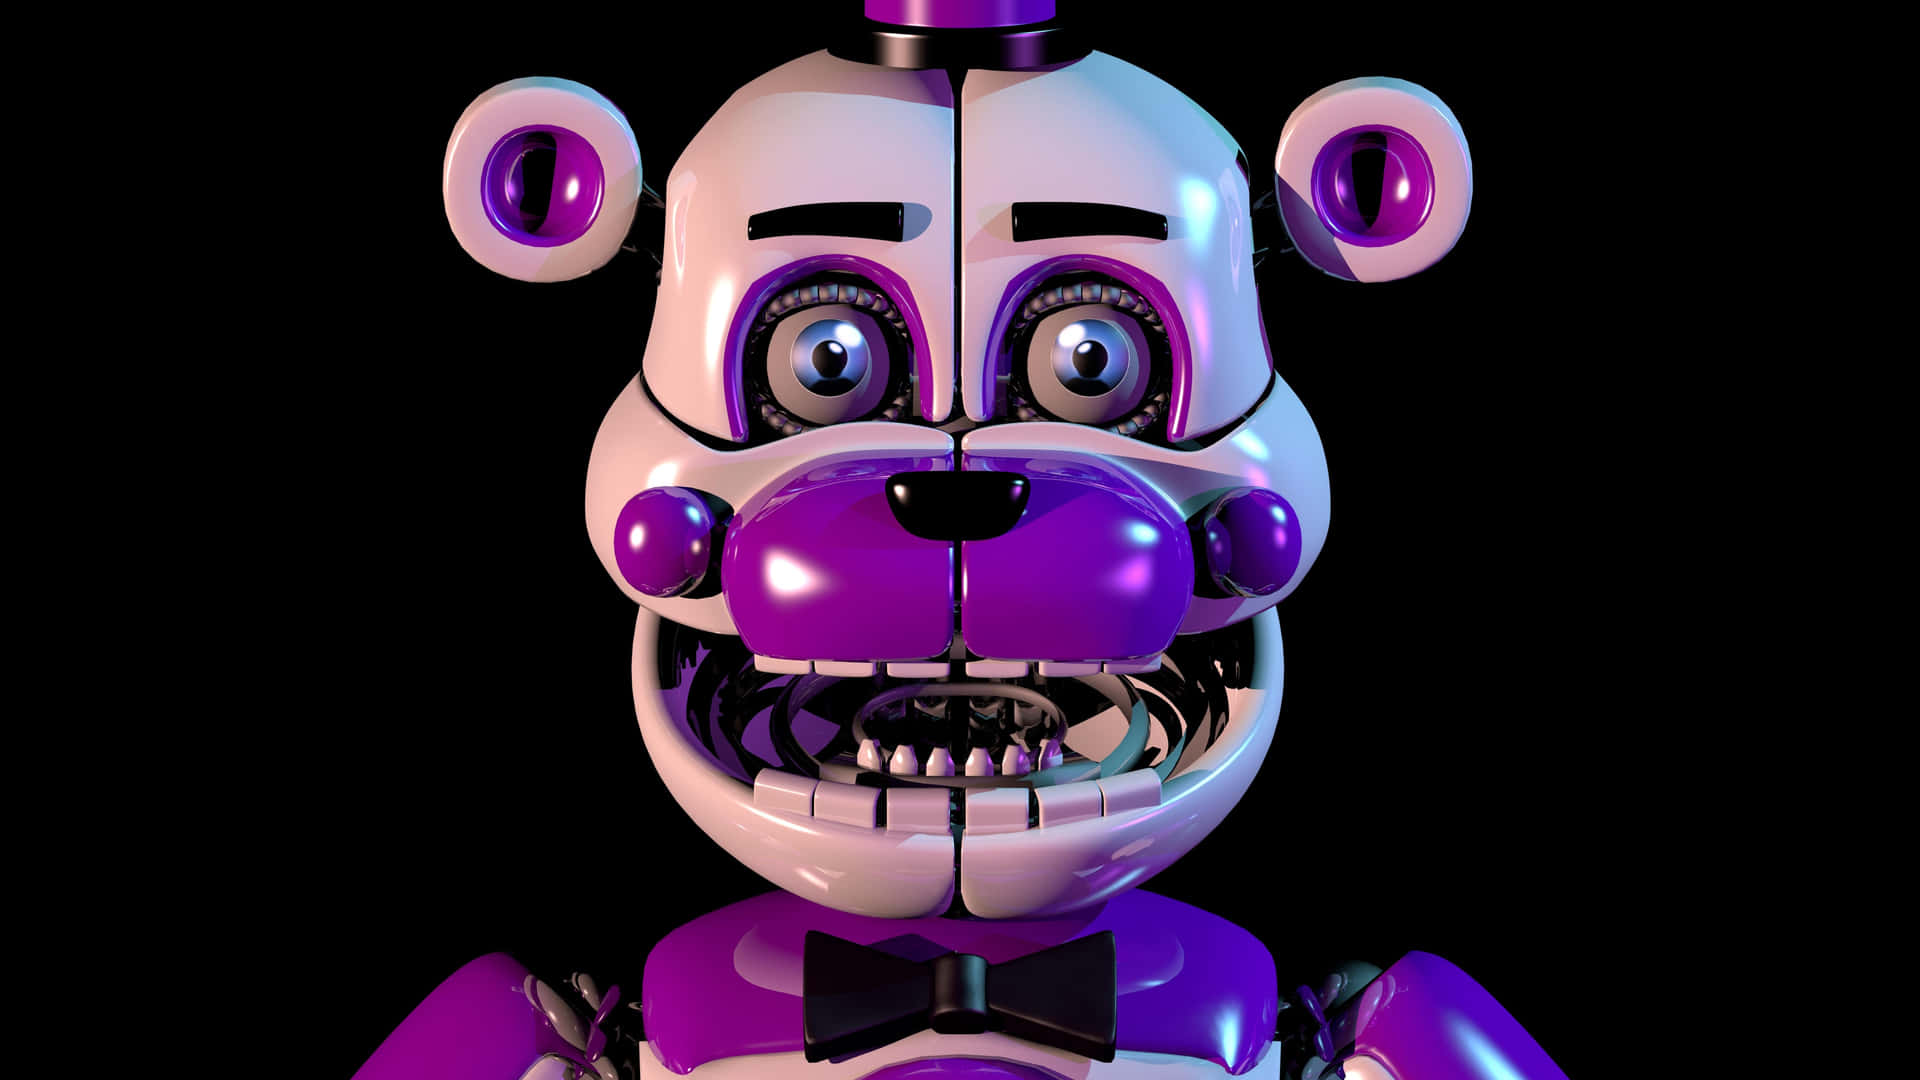 Funtime Freddy and his Puppet Bon-Bon in the Spotlight Wallpaper